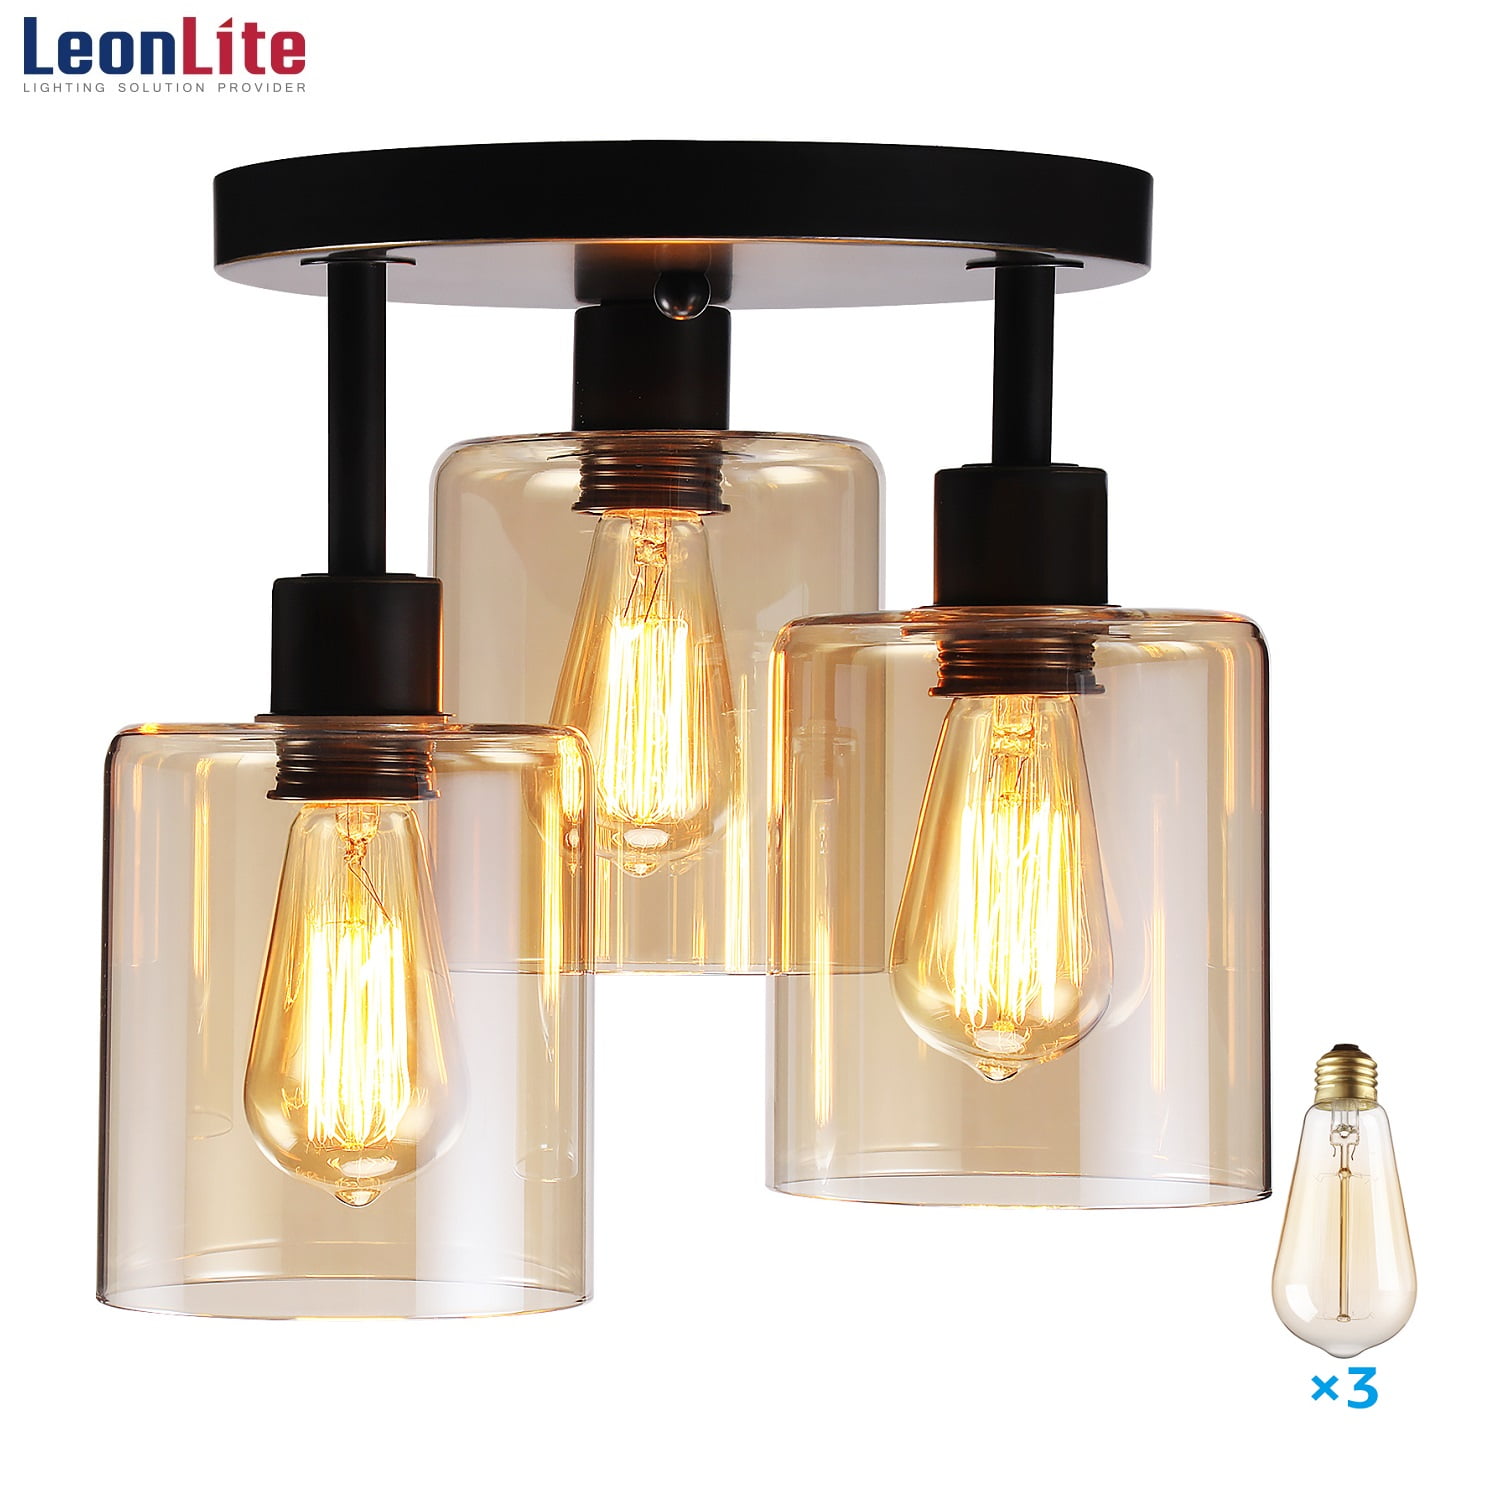 3Pcs Light Accessory Vintage Light Shade Ceiling Lamp Cover for Home Bedroom 